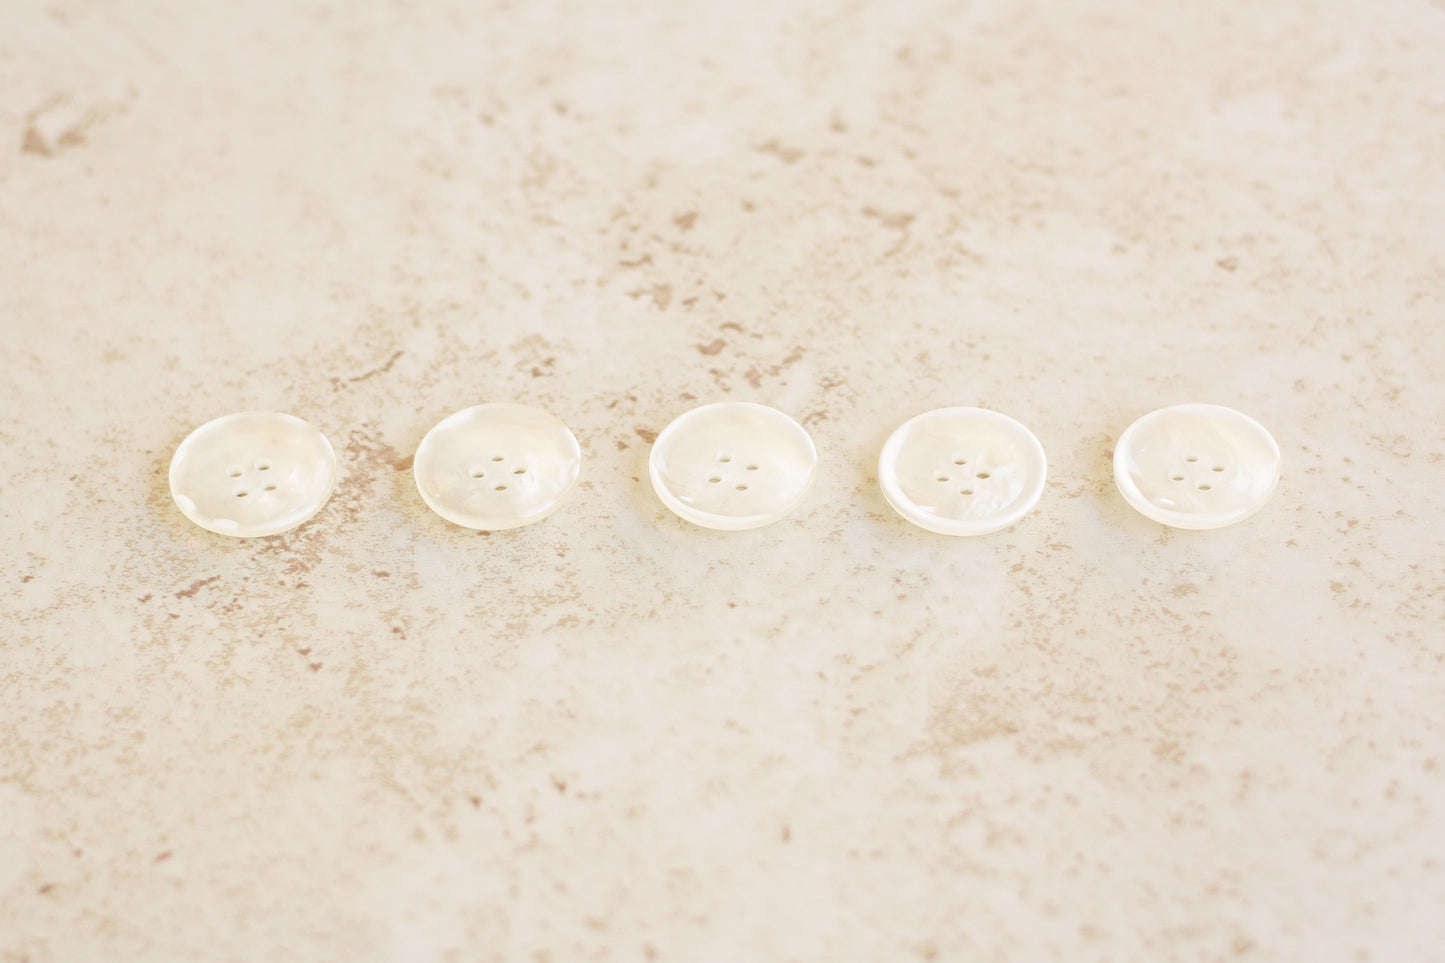 Set of 5 Medium Buttons - Pearlized White (0.9"/23mm)